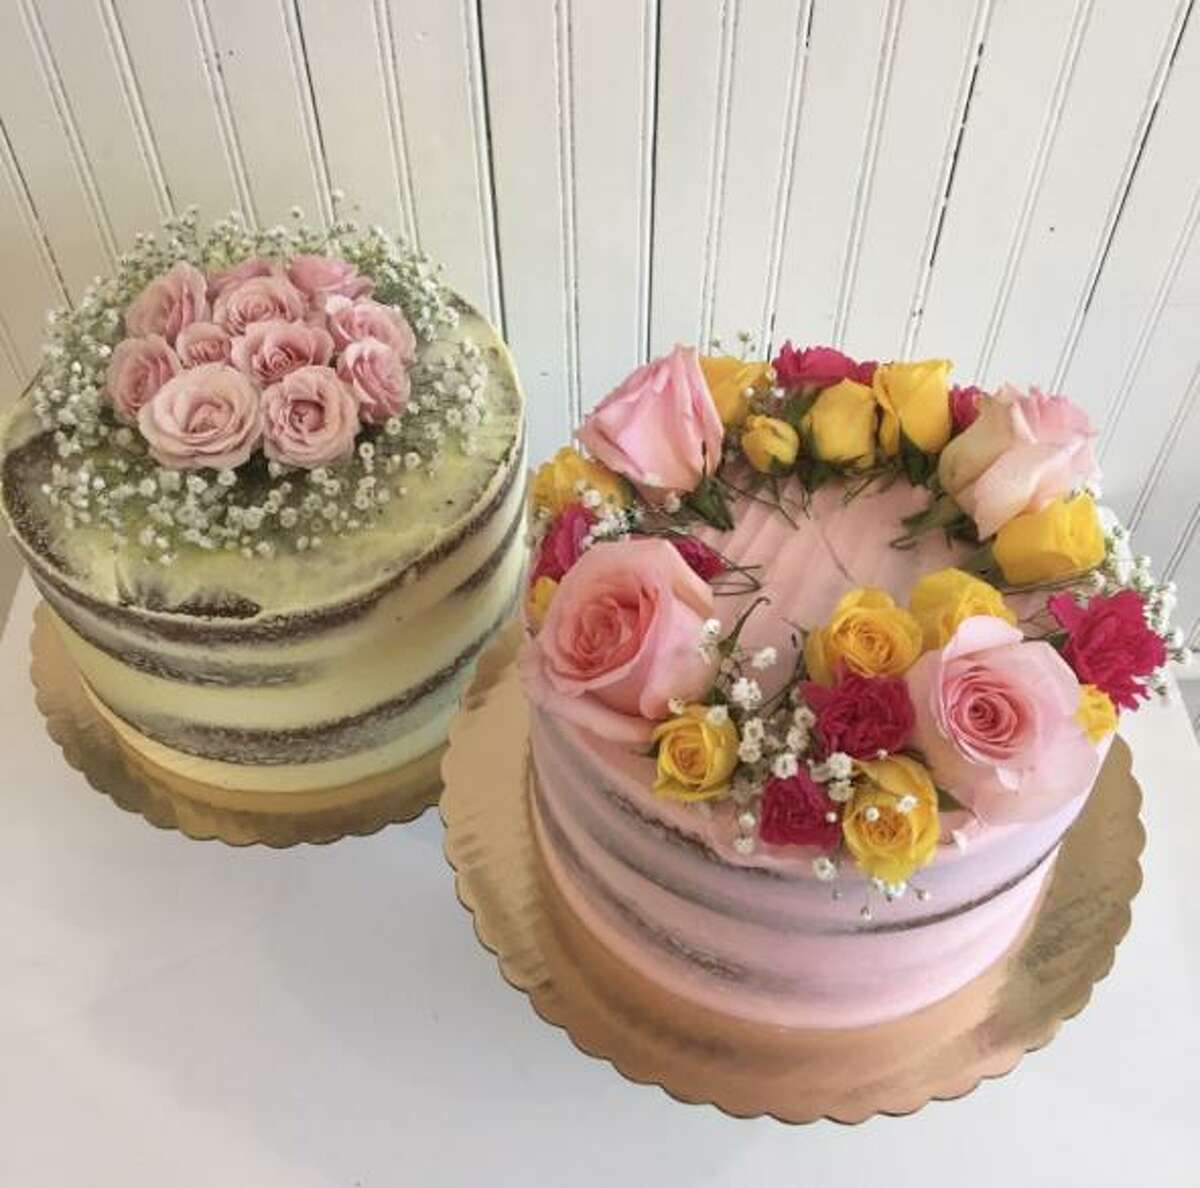 Cakes from Wildflour Confections in Seymour. “We are not closing because of COVID,” DeMatteo said. It’s the uncertainty and the length of time she’ll be away, which, she says, won’t be just like a month of training. “I don’t want to leave someone else hanging in case a third wave comes,” she said.